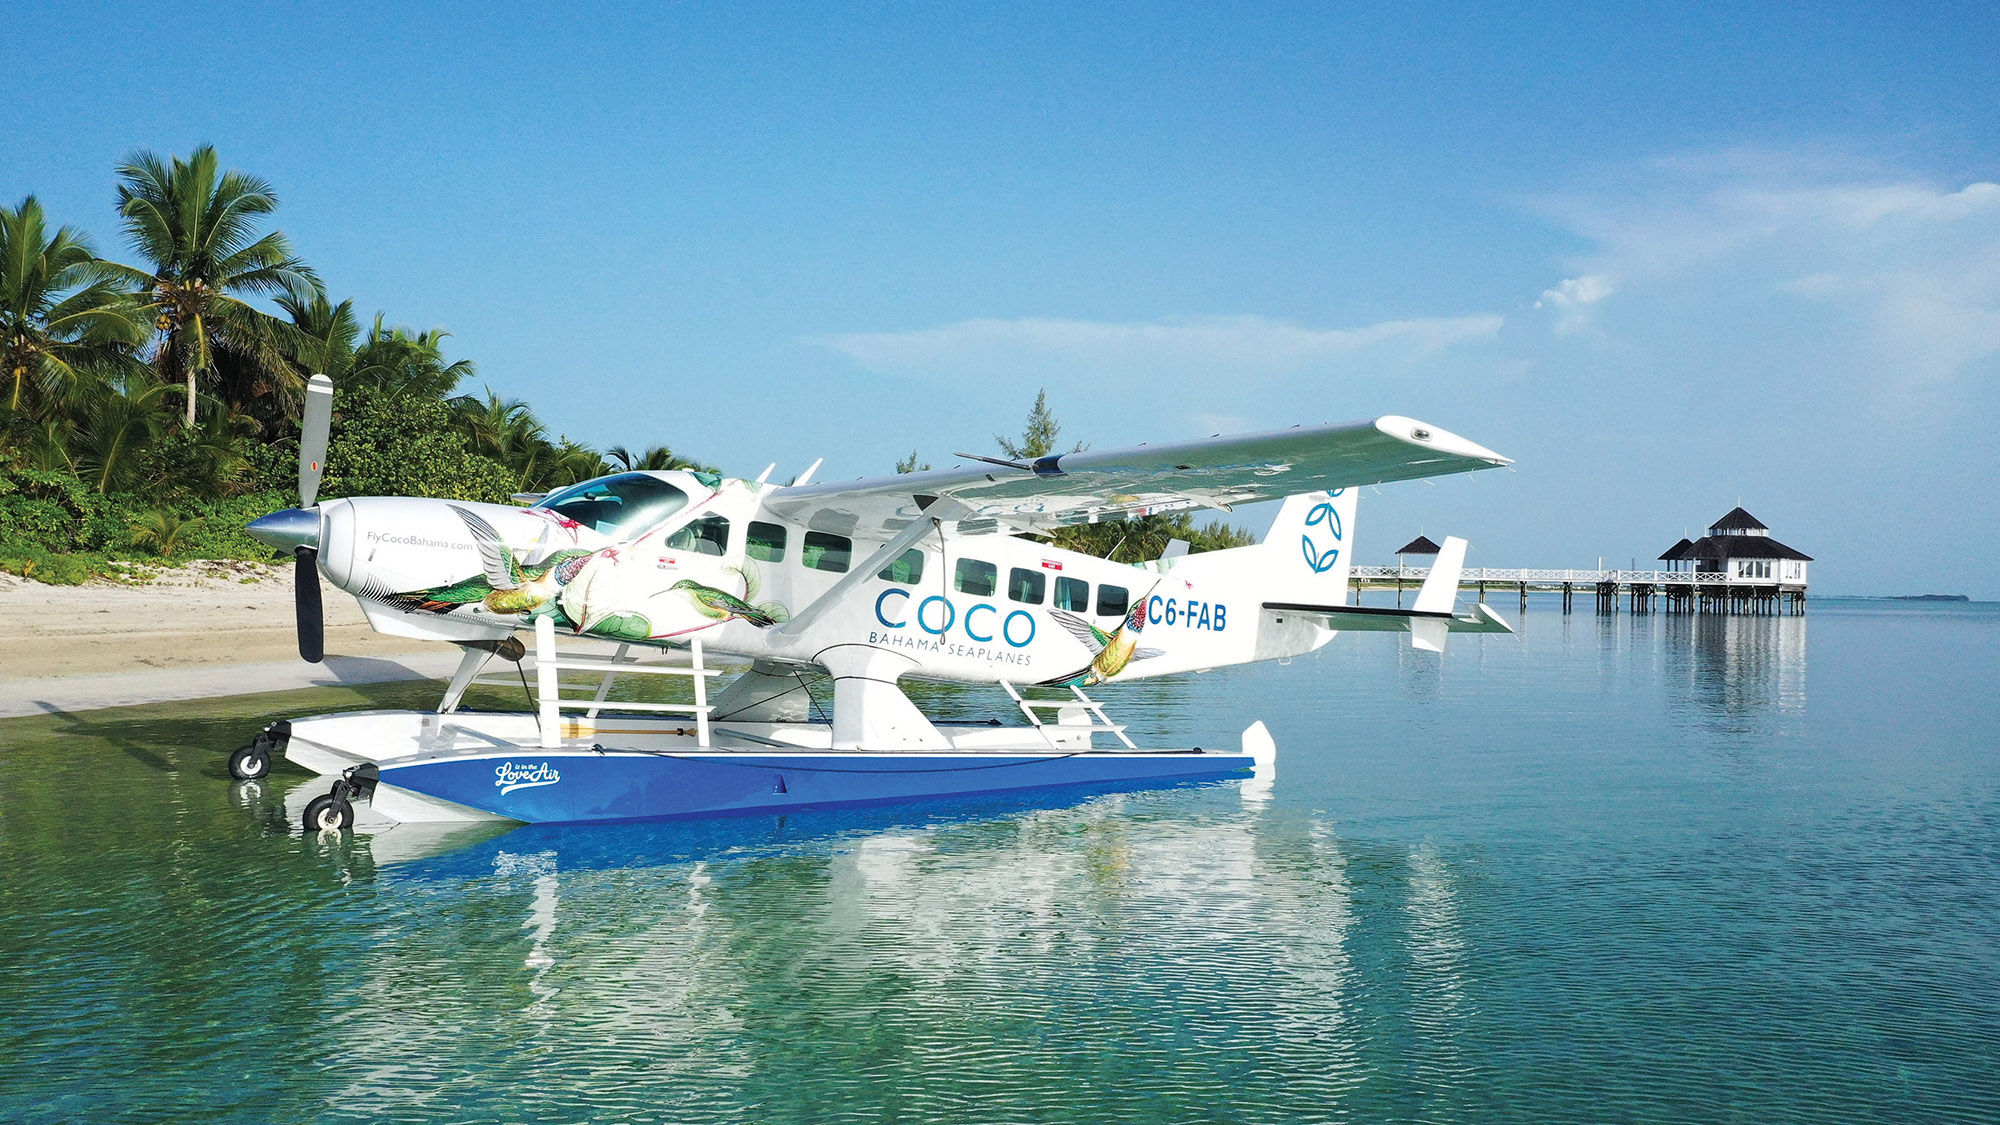 Coco Bahama Seaplanes takes guests from Nassau to Kamalame Cay on the island of Andros.